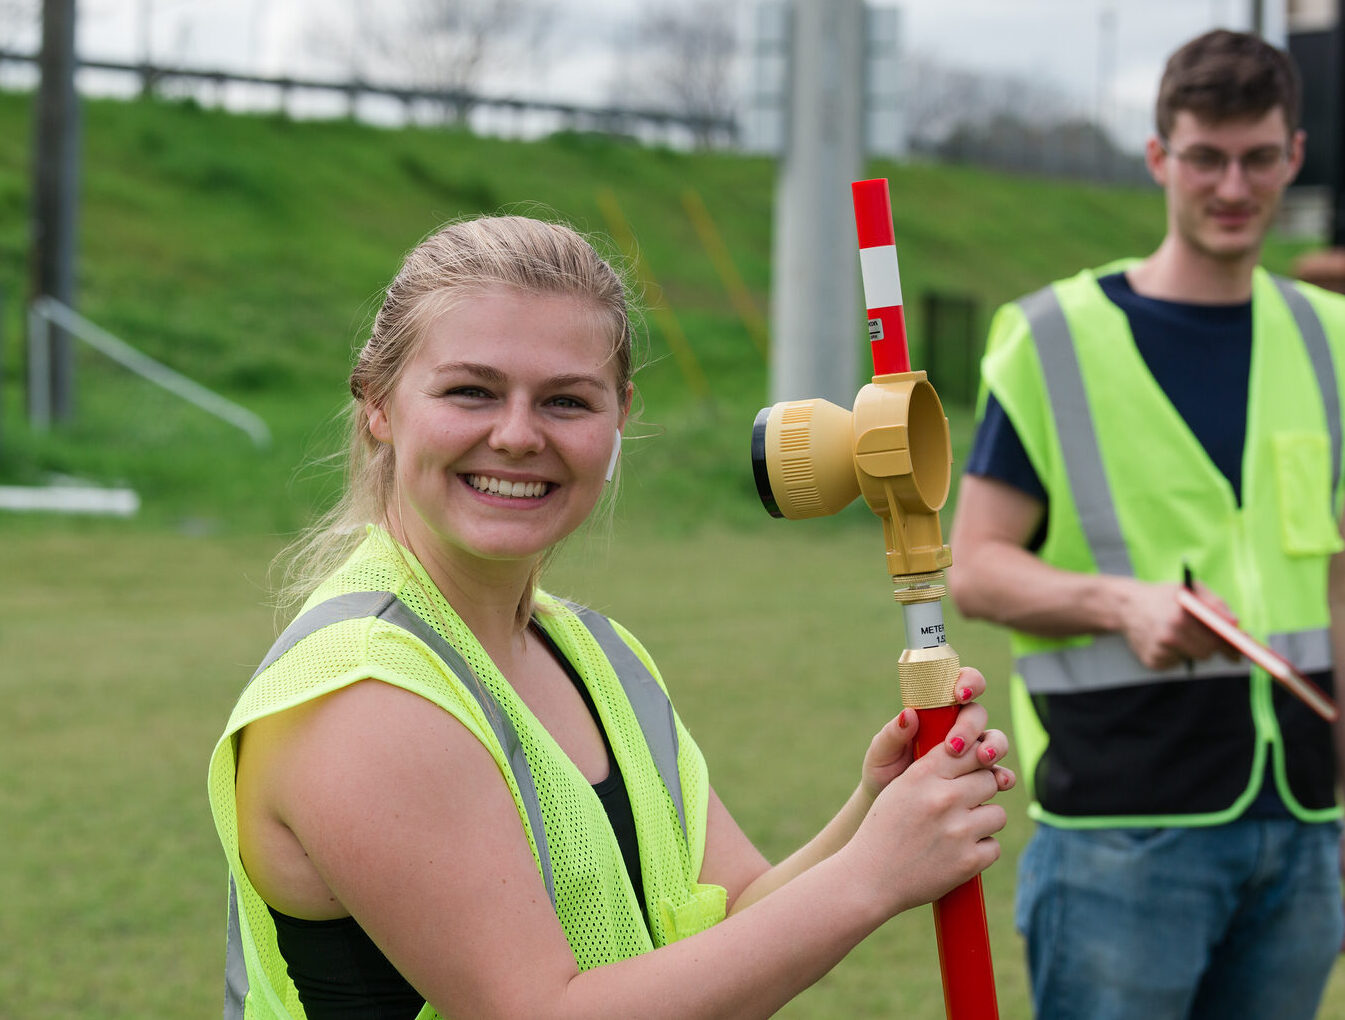 Civil engineering student smiling outdoors with surveying equipment